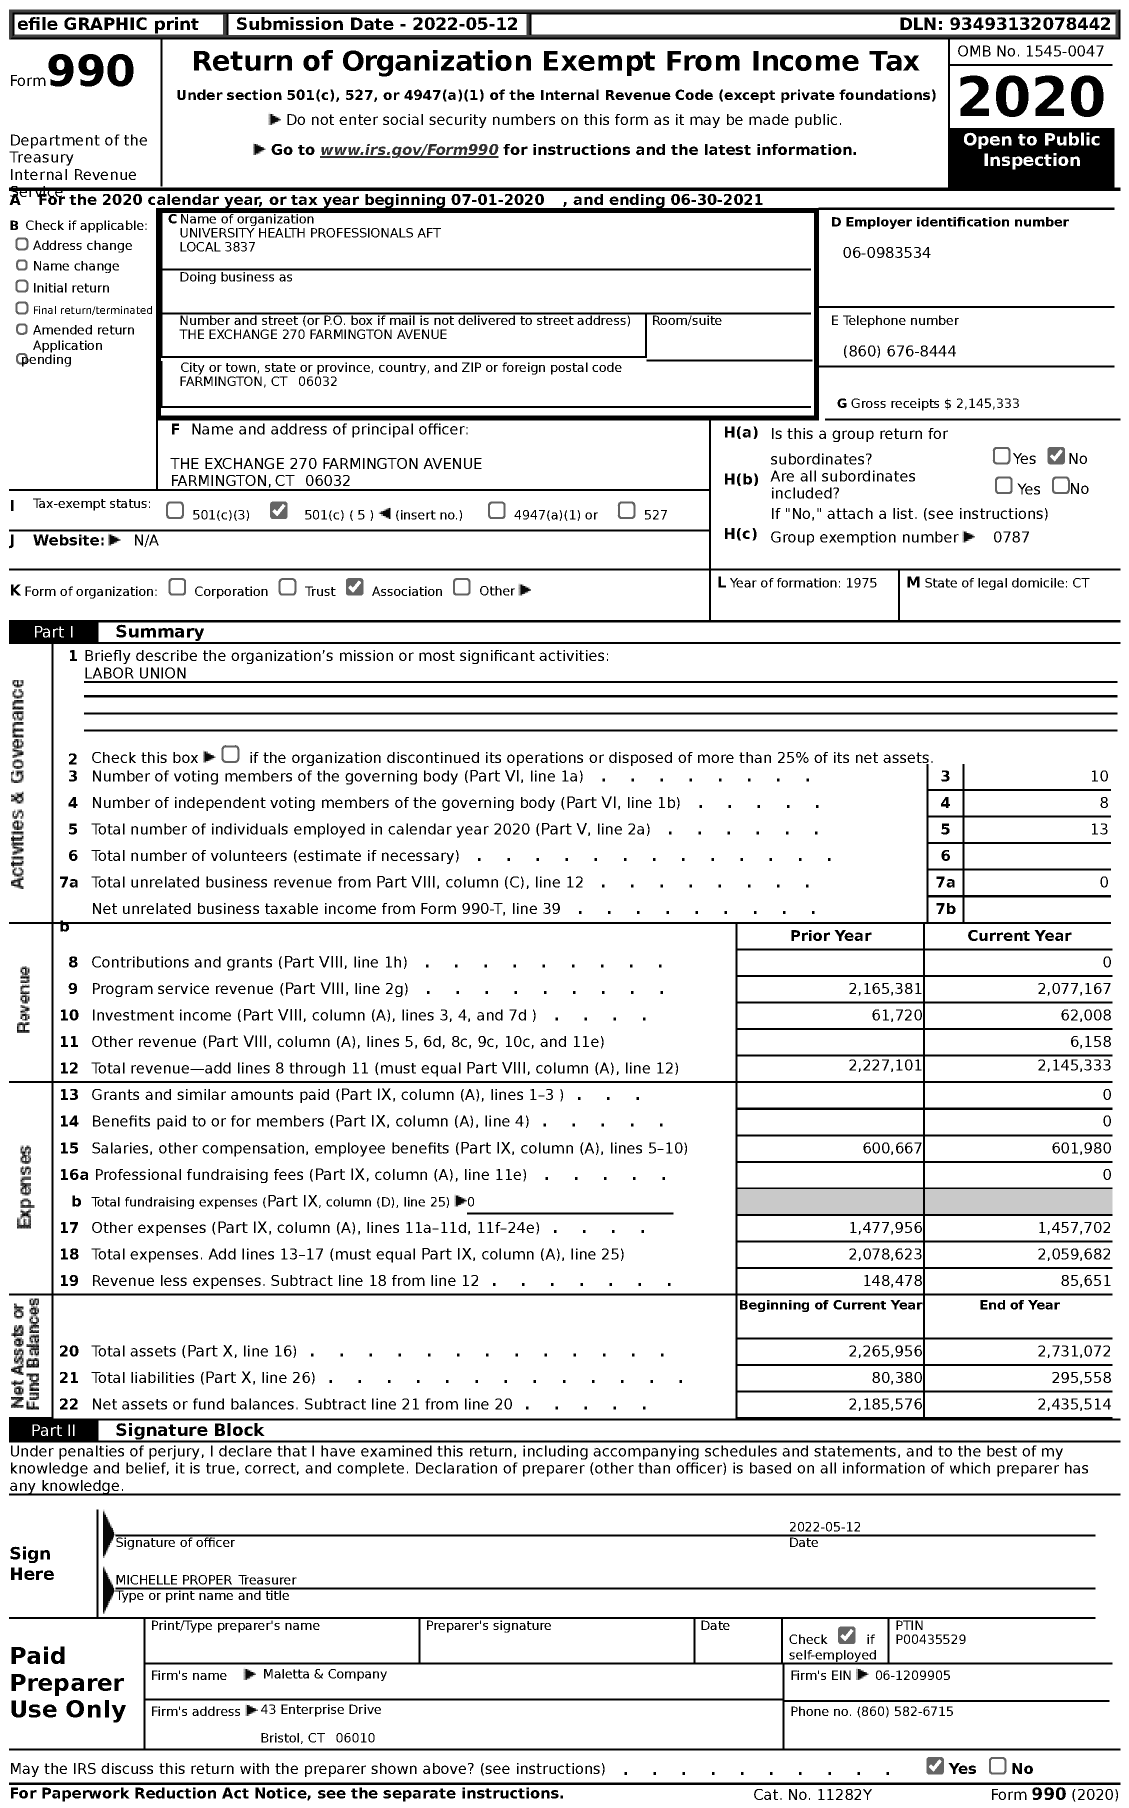 Image of first page of 2020 Form 990 for American Federation of Teachers - 3837 Univ of CT HLTH Ctr Prof Emp